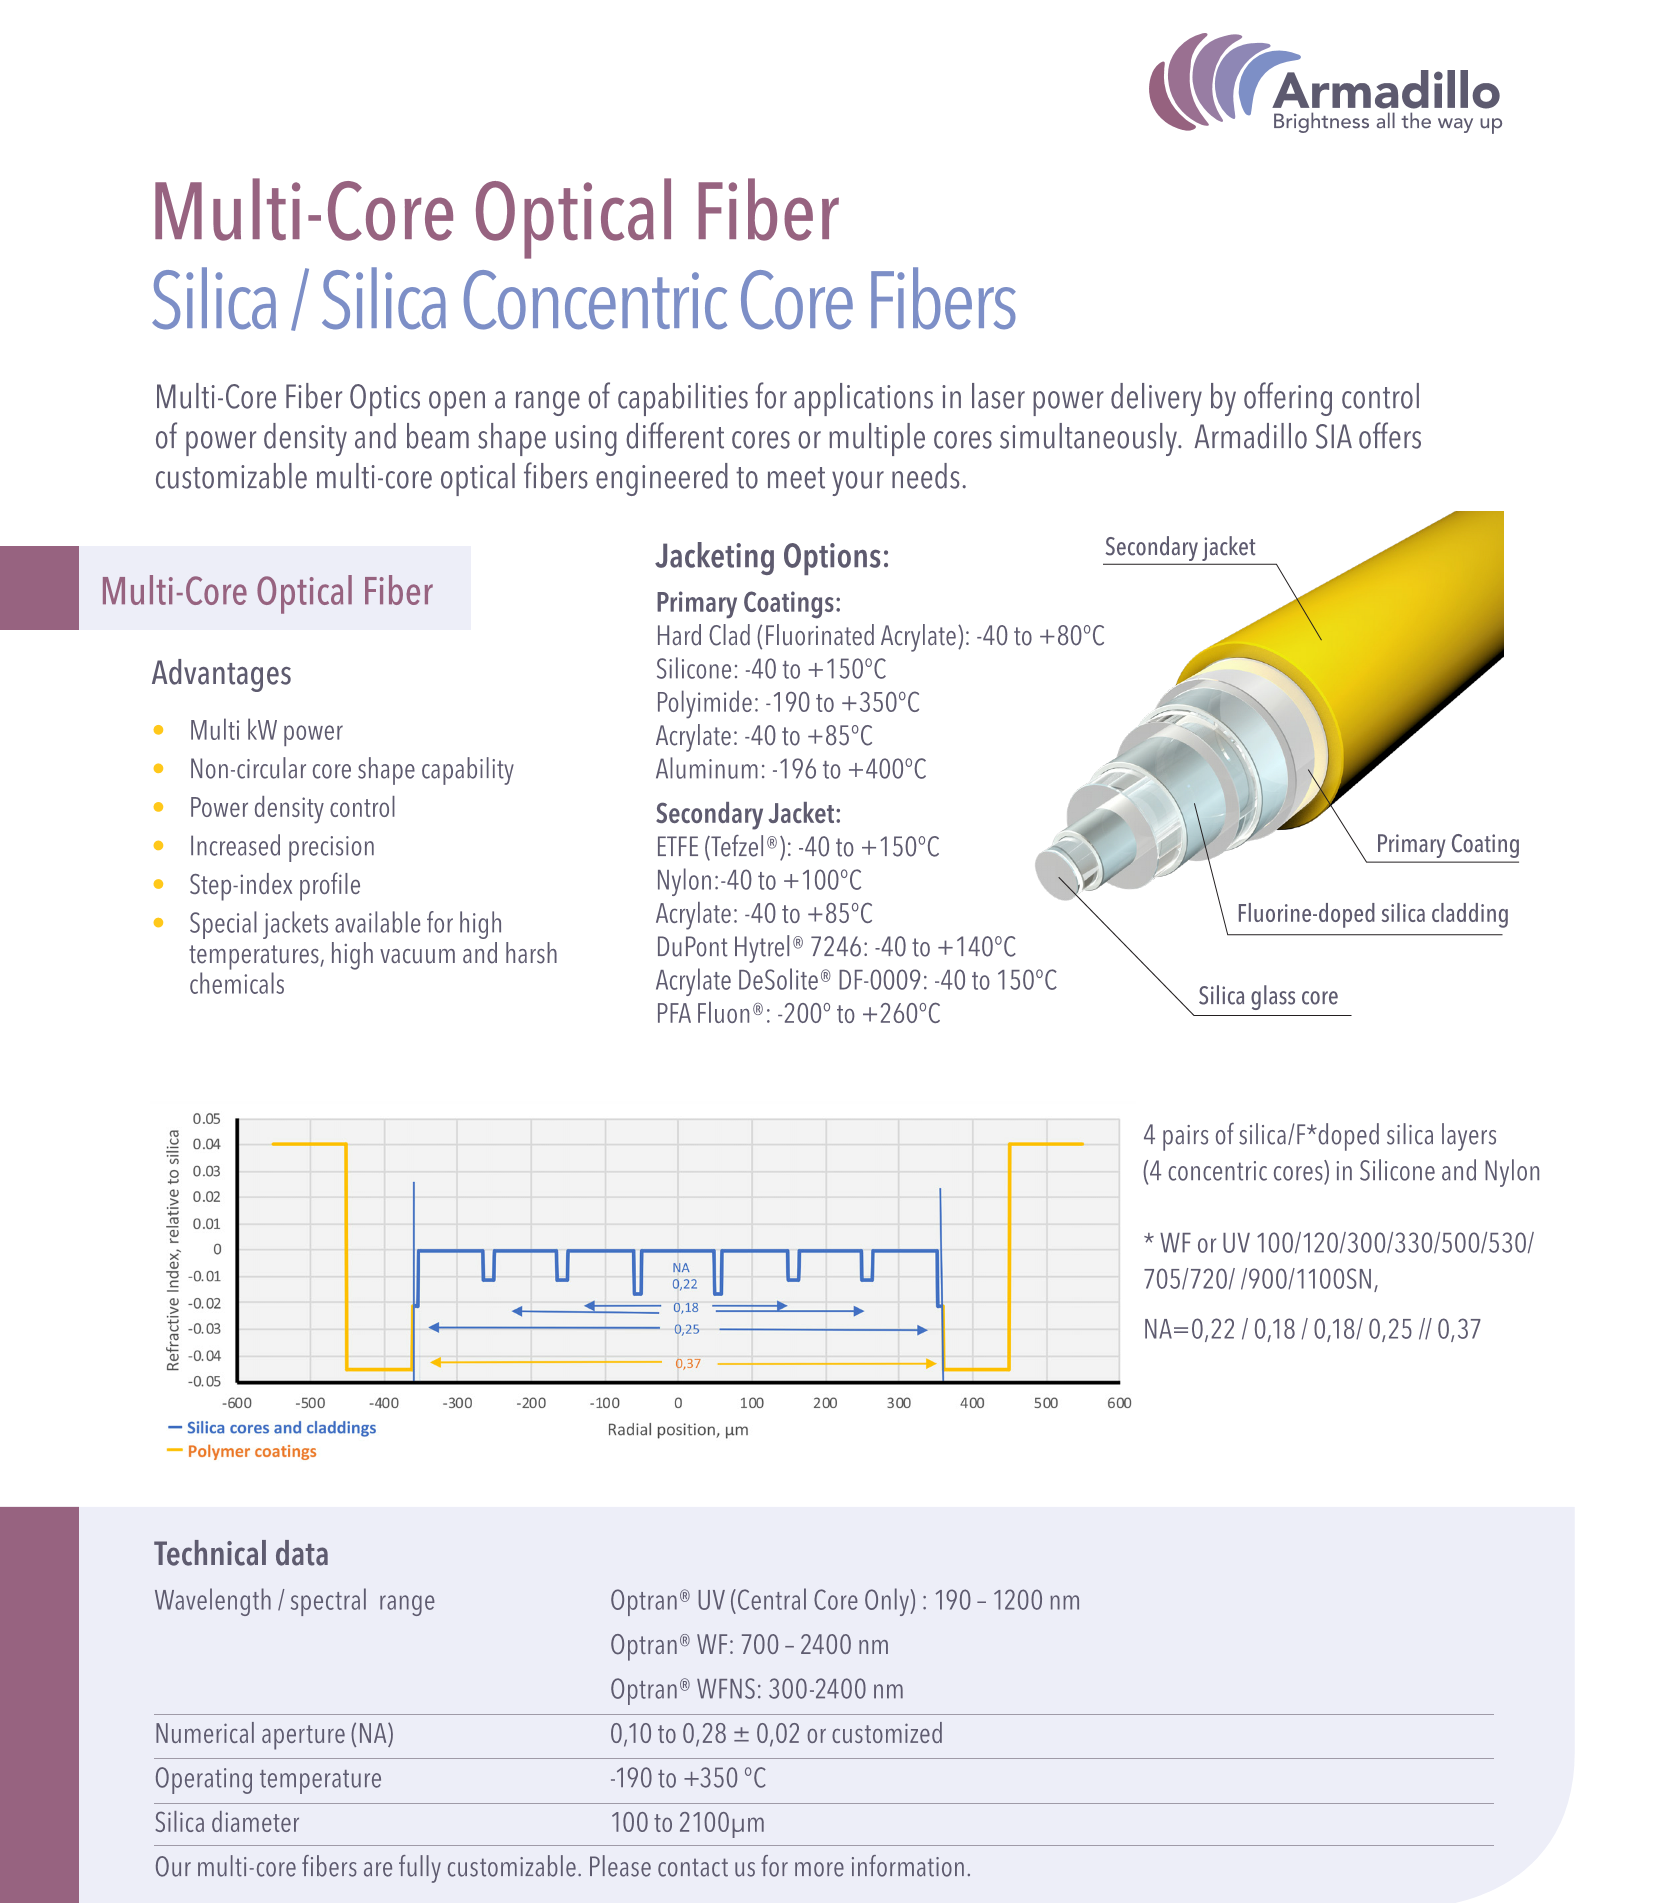 Multi-Core Optical Fiber for Laser Power Delivery